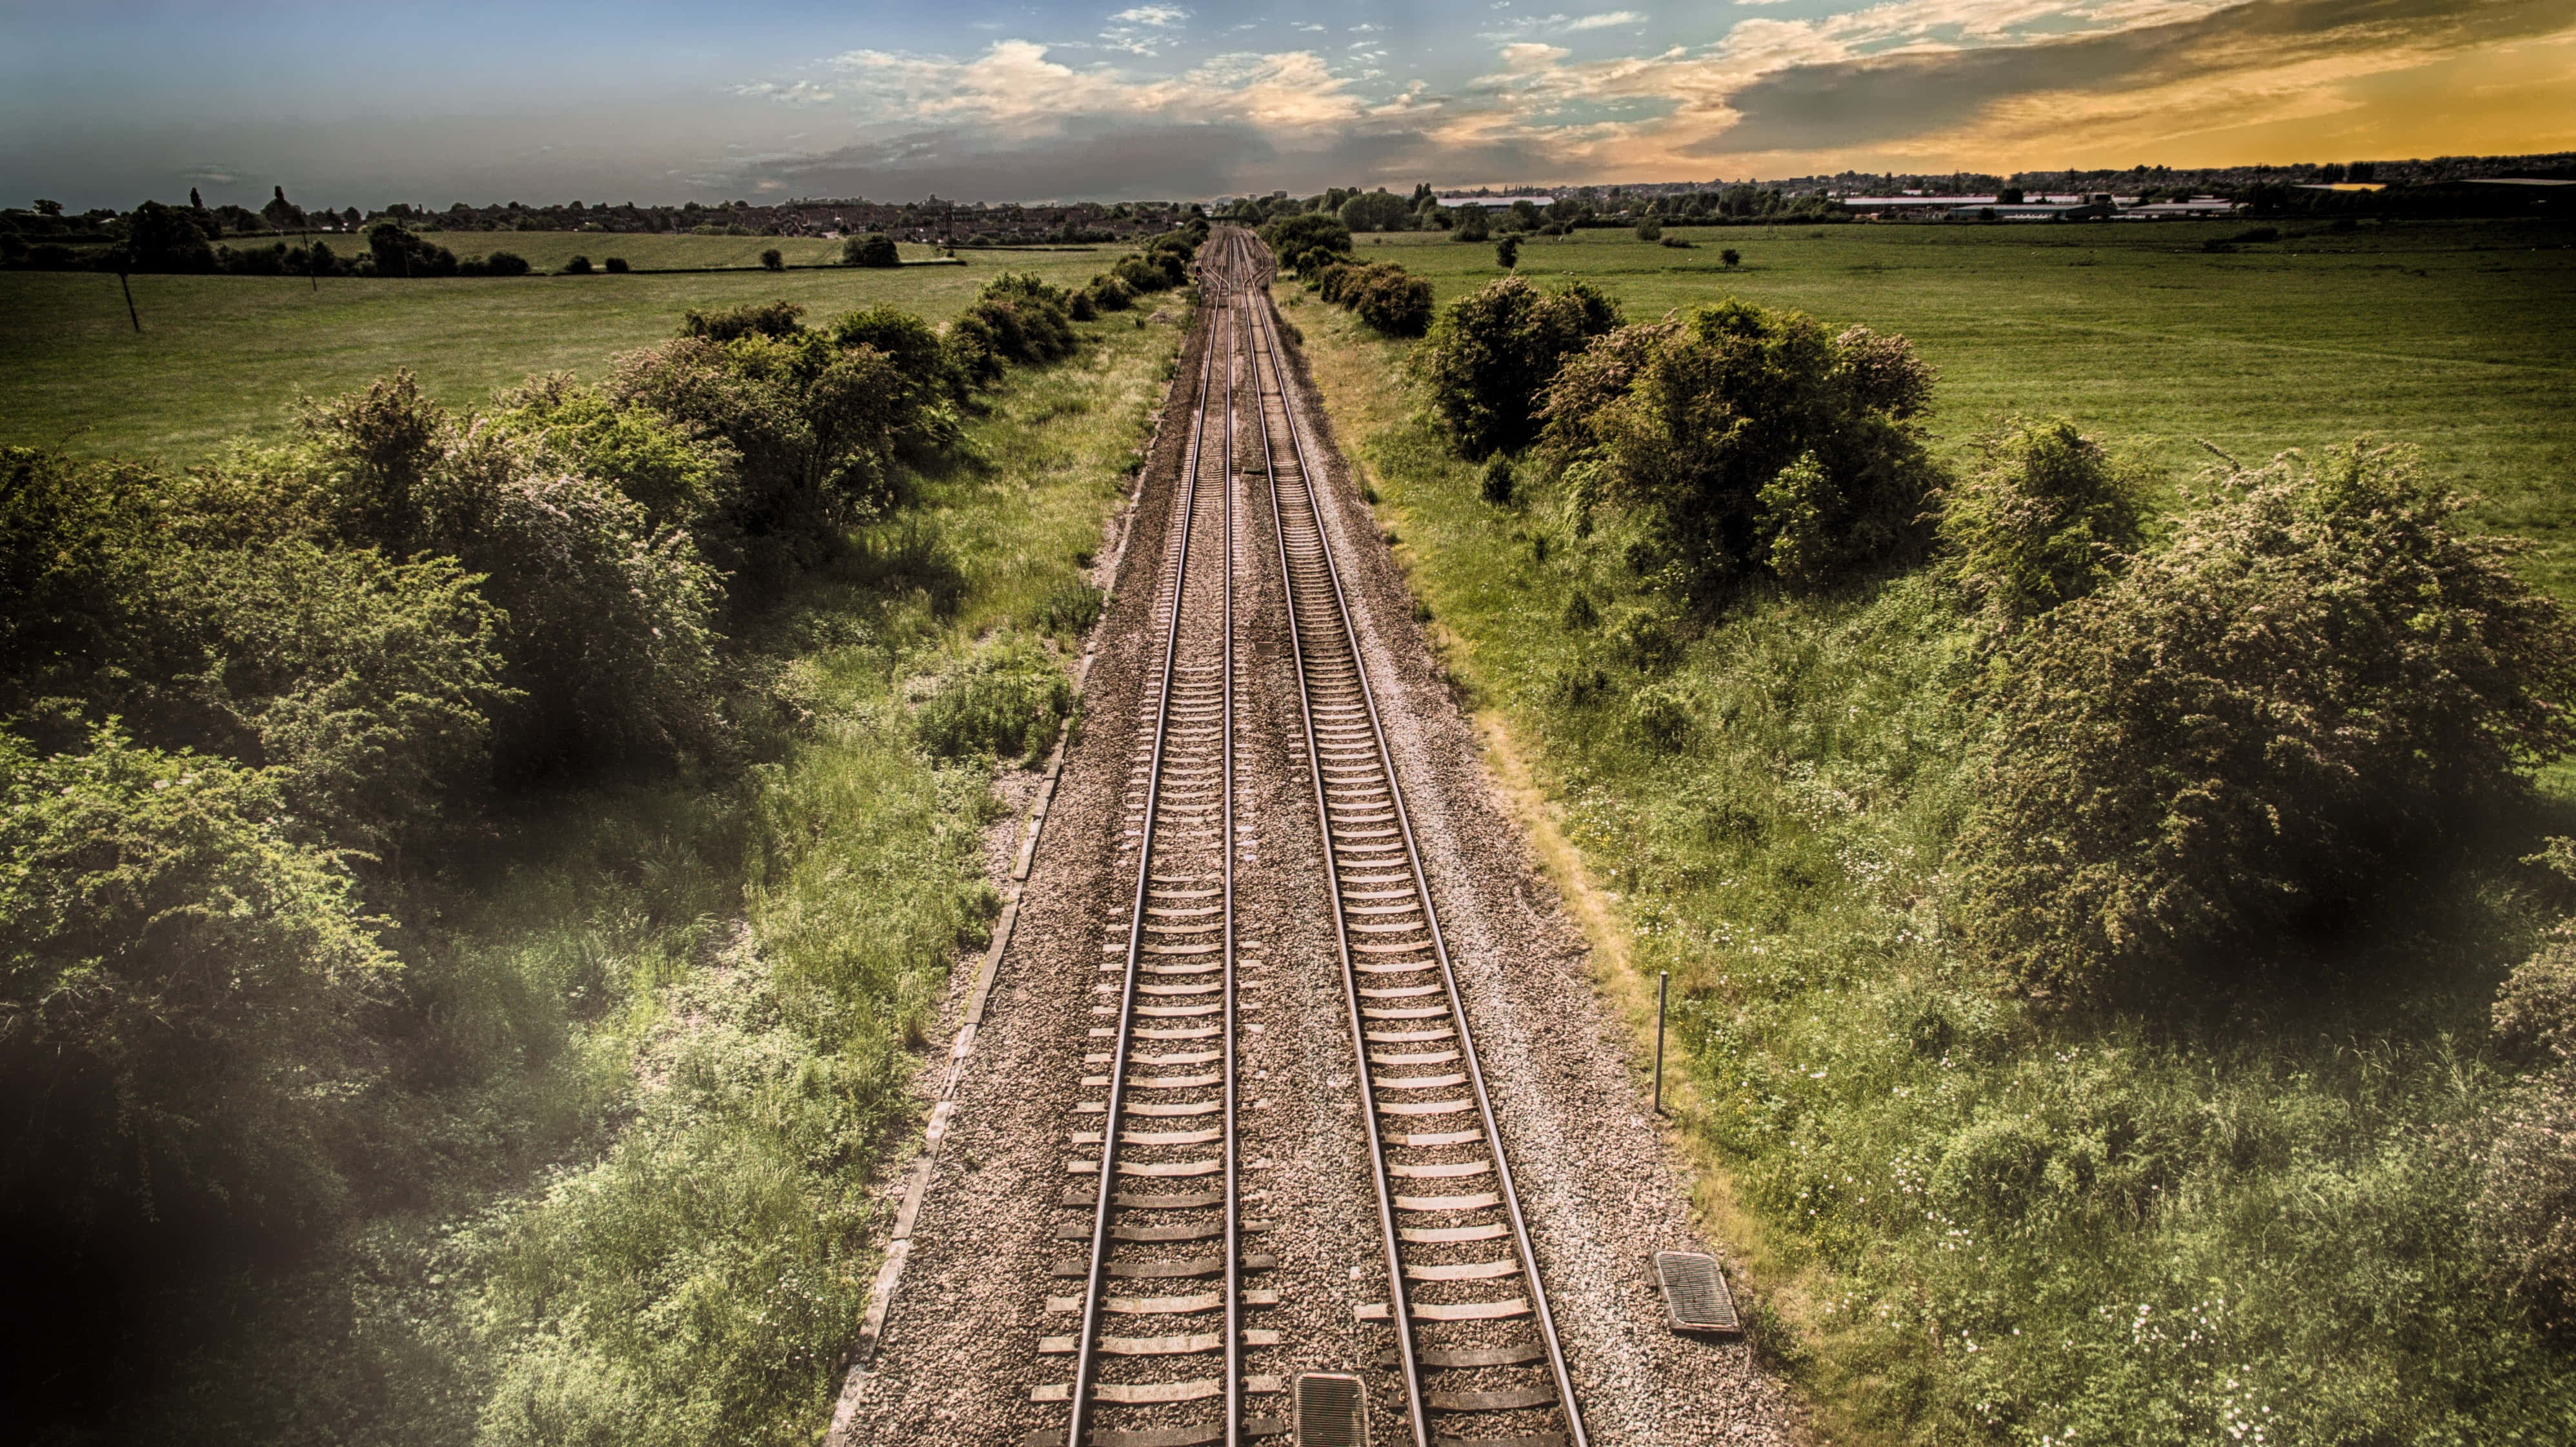 "Endless Journey On the Tracks"